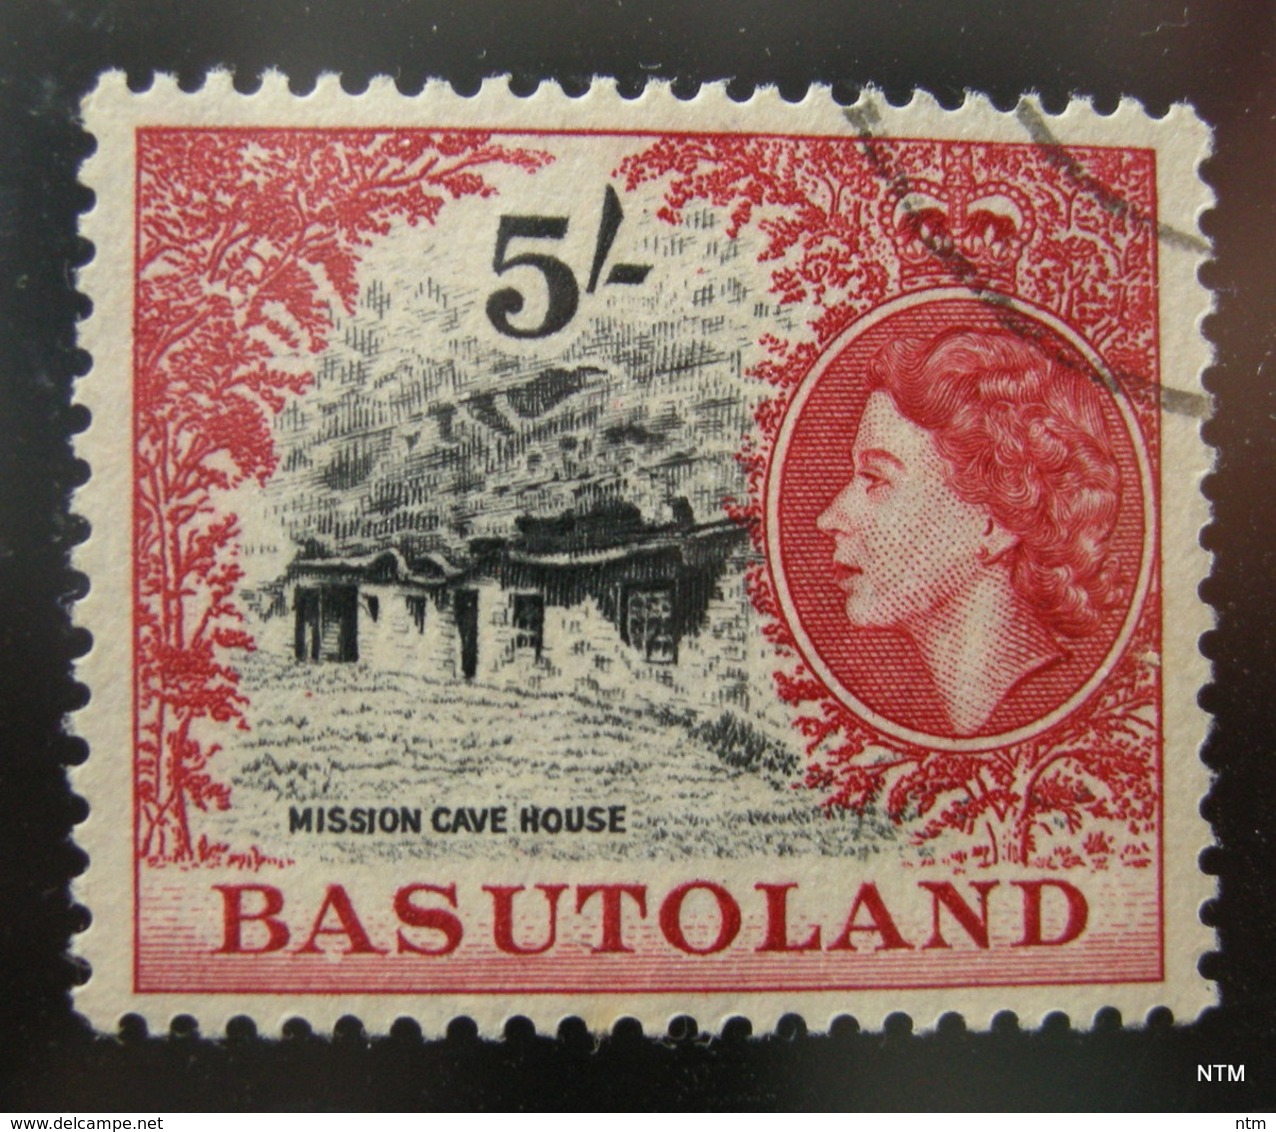 BASUTOLAND 1954. Mission Cave House. 5s - Black And Red. SG 52. Used. - 1933-1964 Kronenkolonie